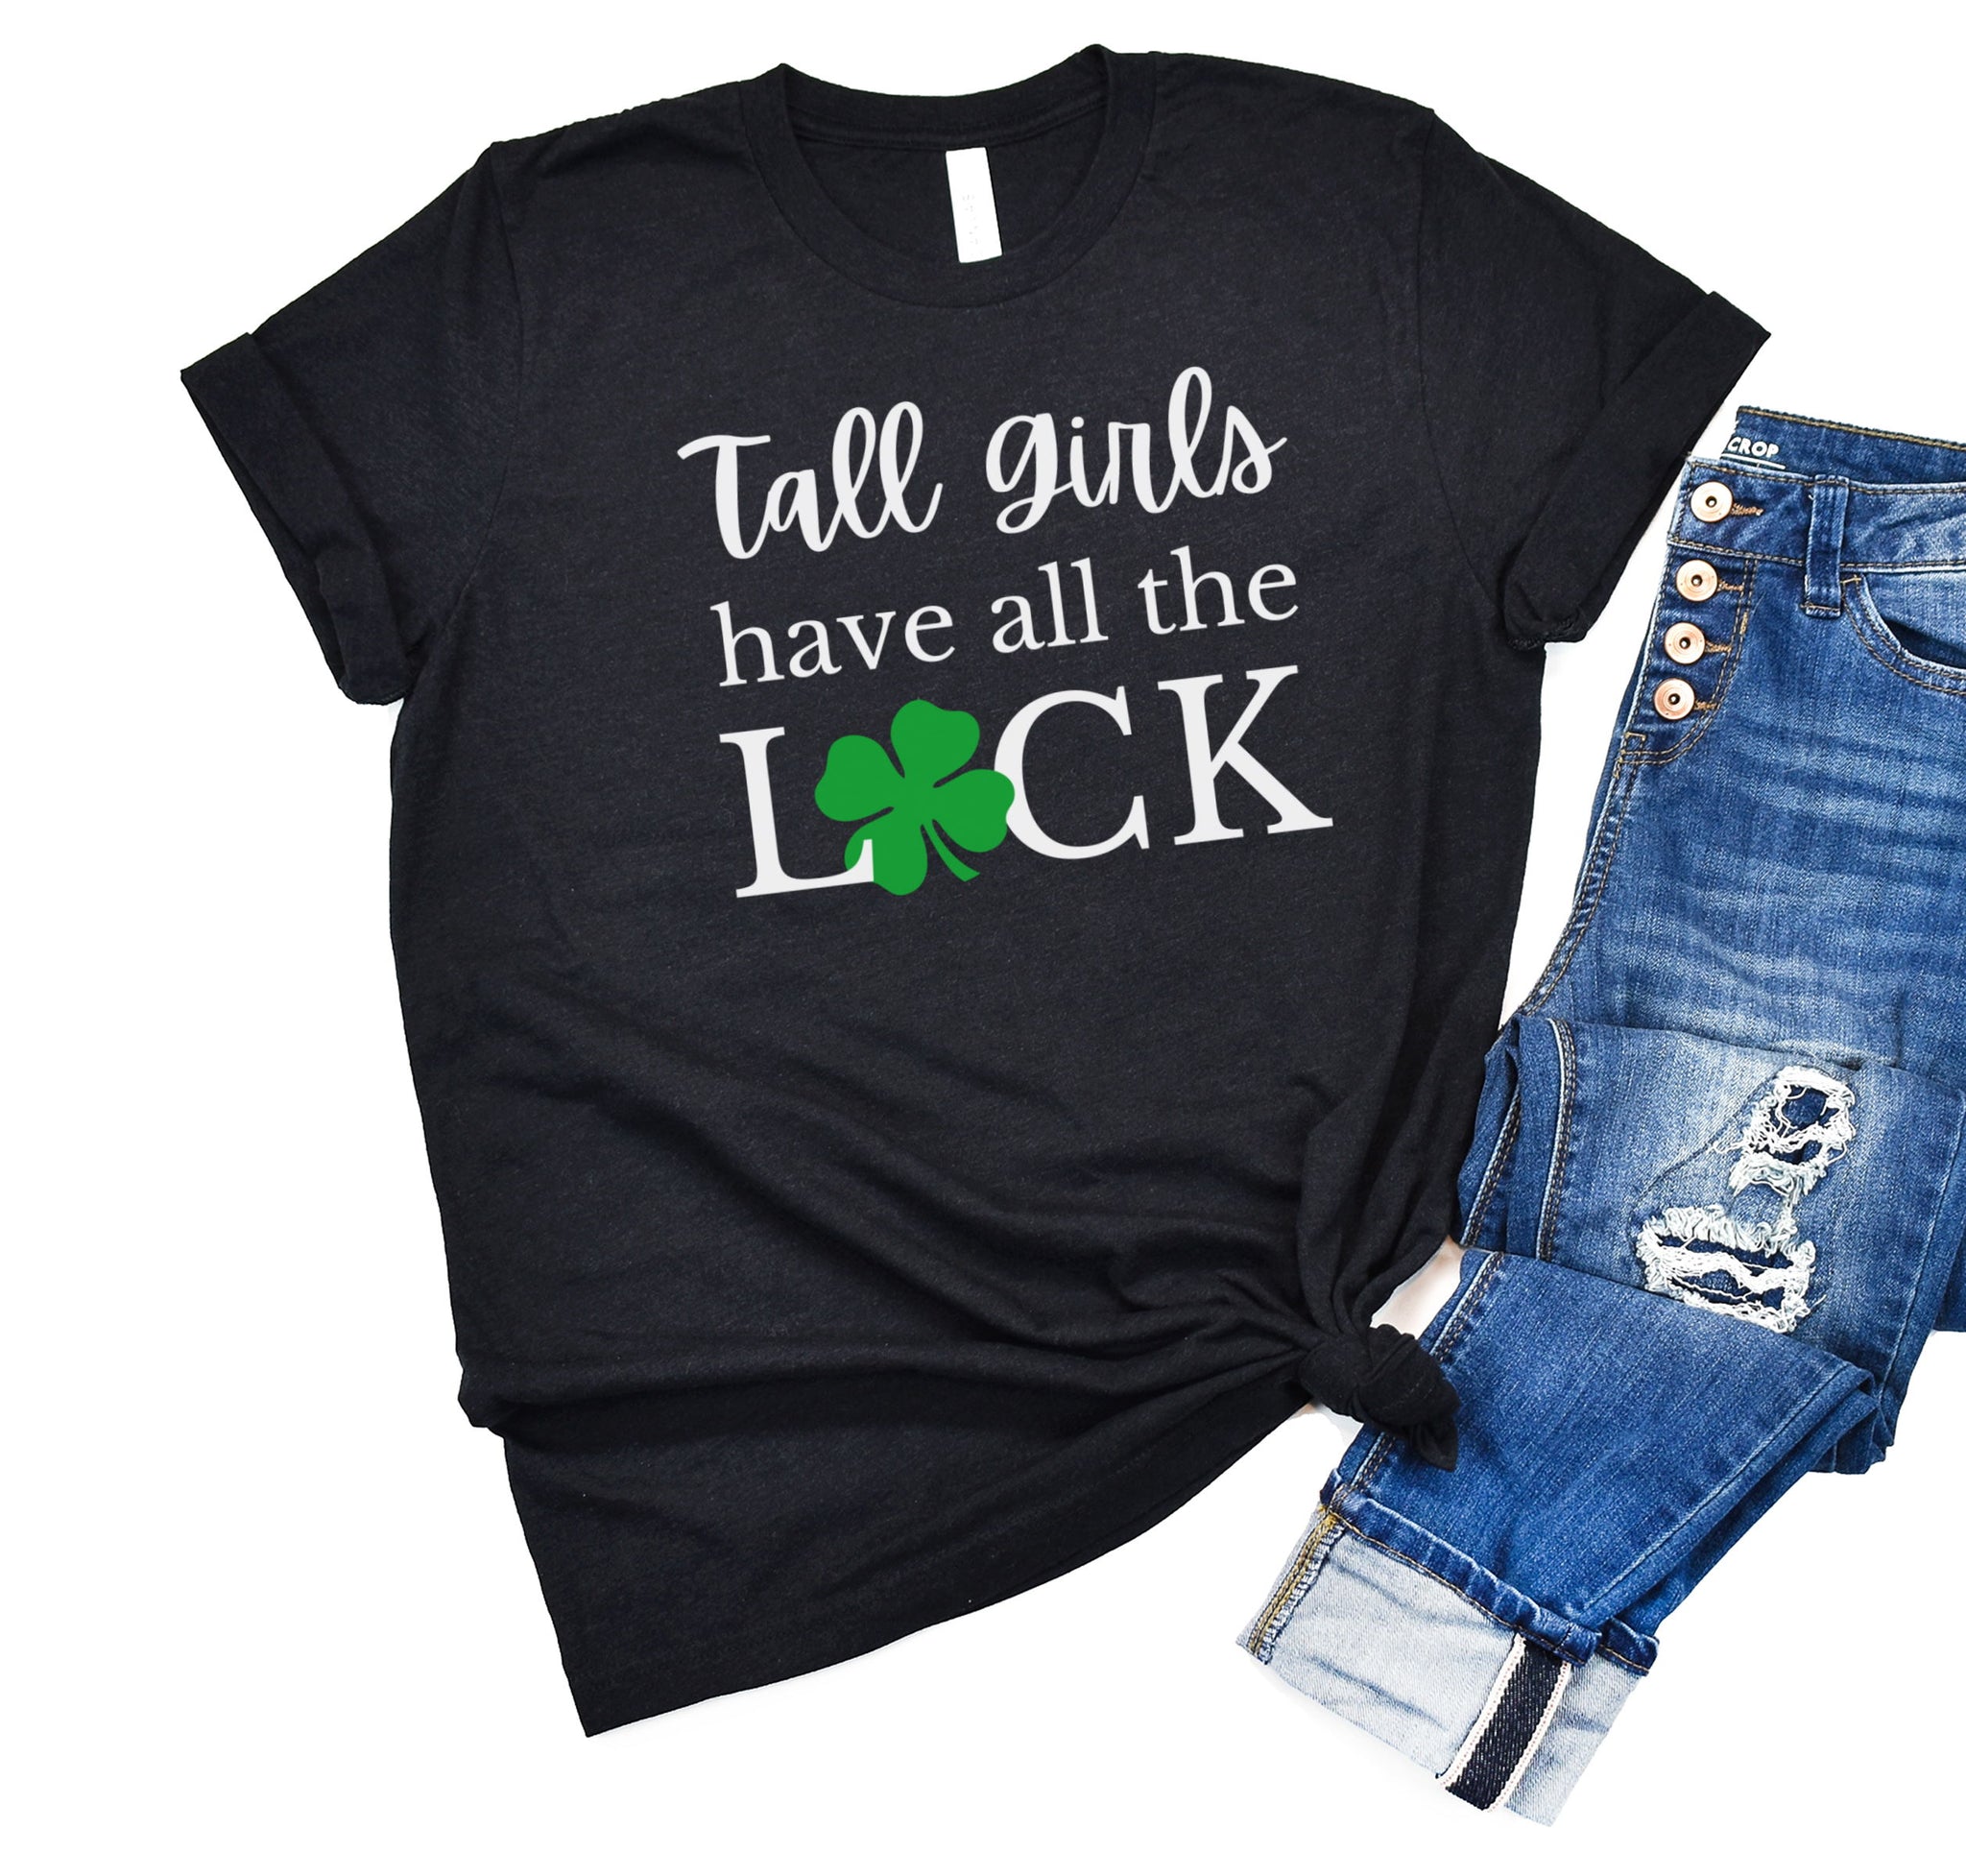 St. Patrick's Day t-shirt that says "Tall Girls Have All The Luck".